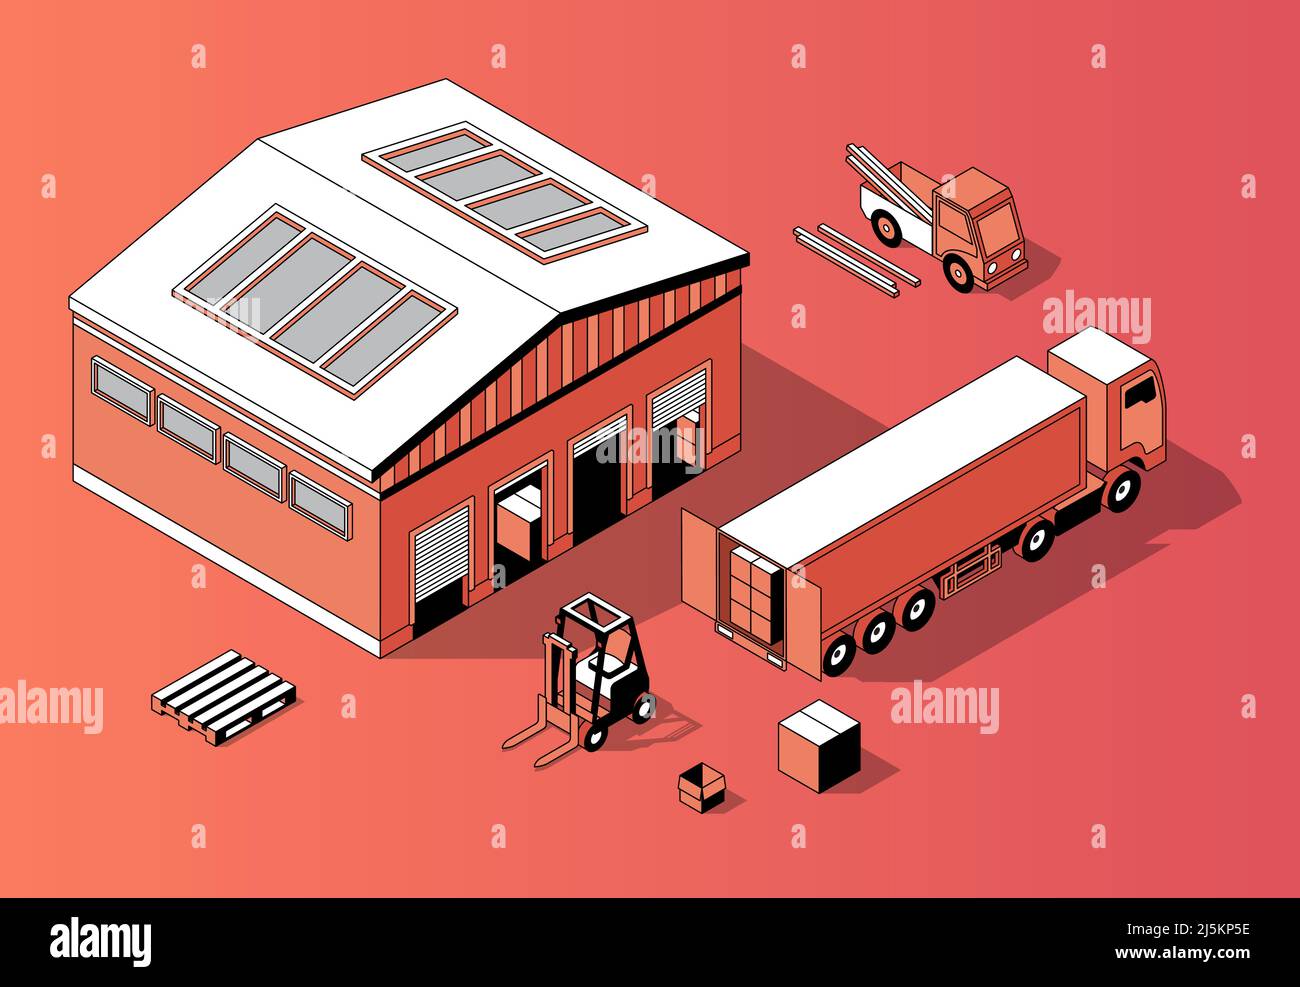 Vector 3d isometric warehouse with truck and forklift. Thin line style, transport logistics with storage building. Orange background with goods and re Stock Vector